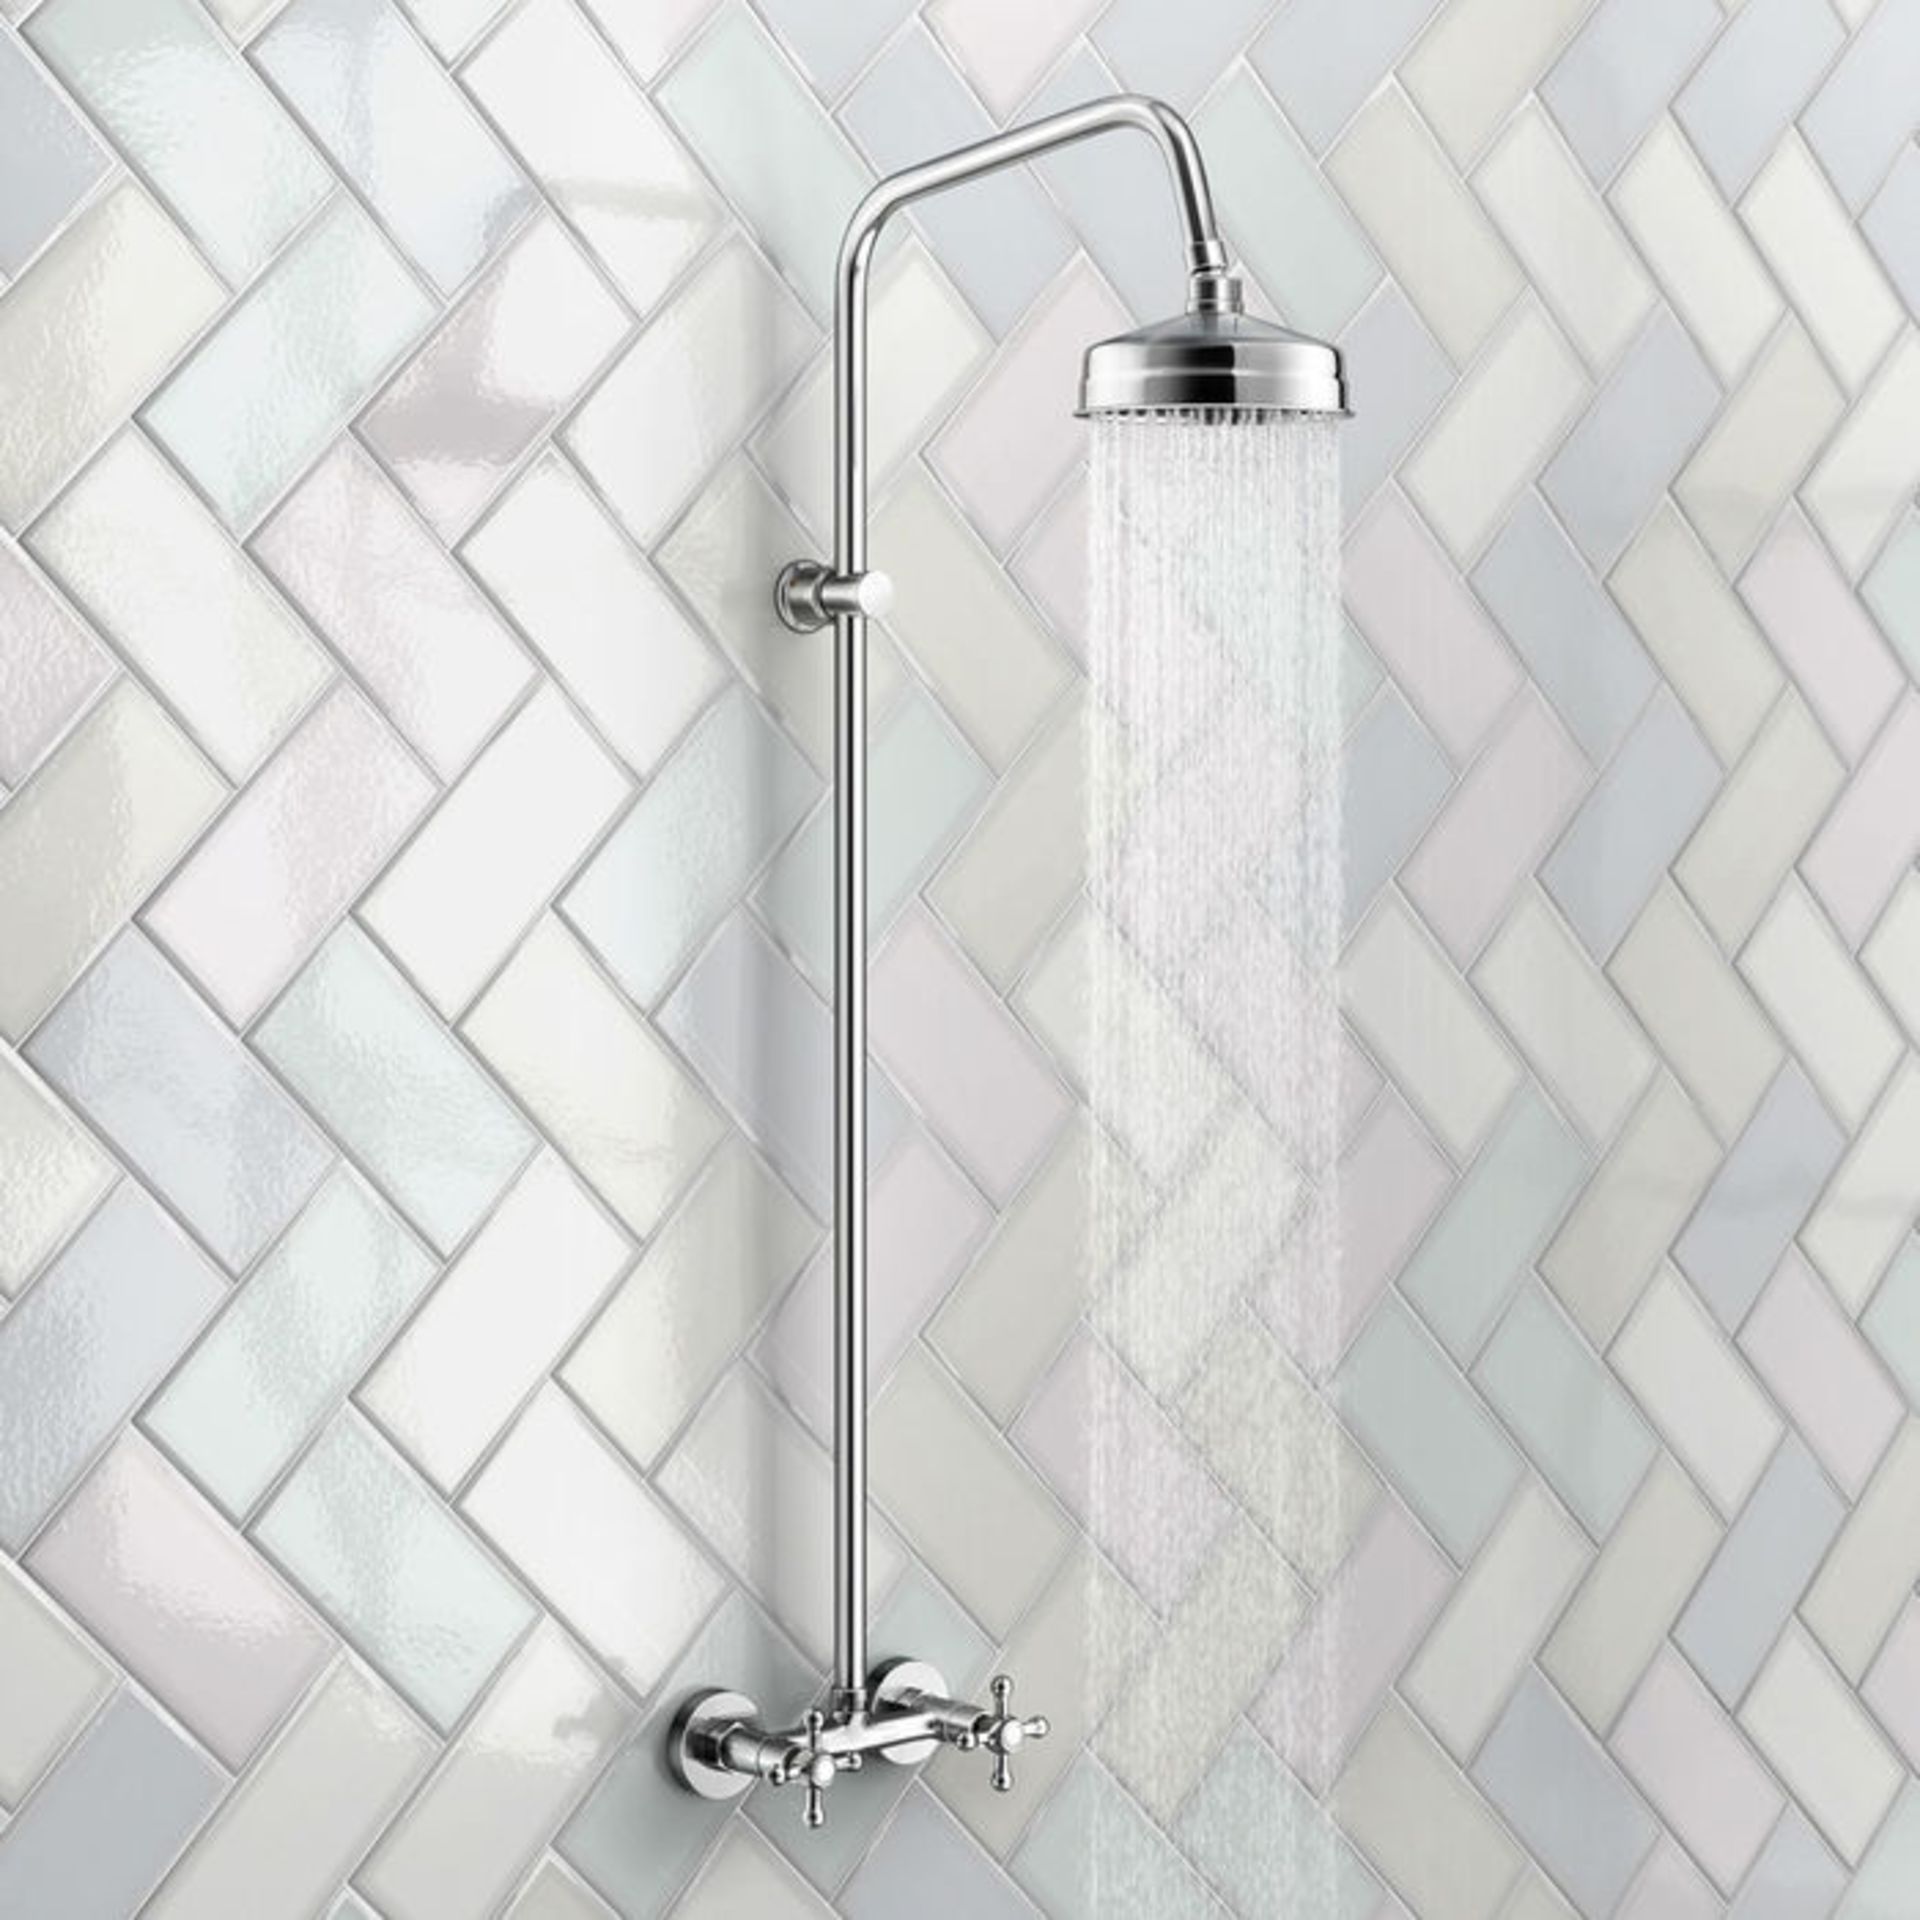 (UK149) Traditional Exposed Shower & Medium Head Exposed design makes for a statement piece Stunning